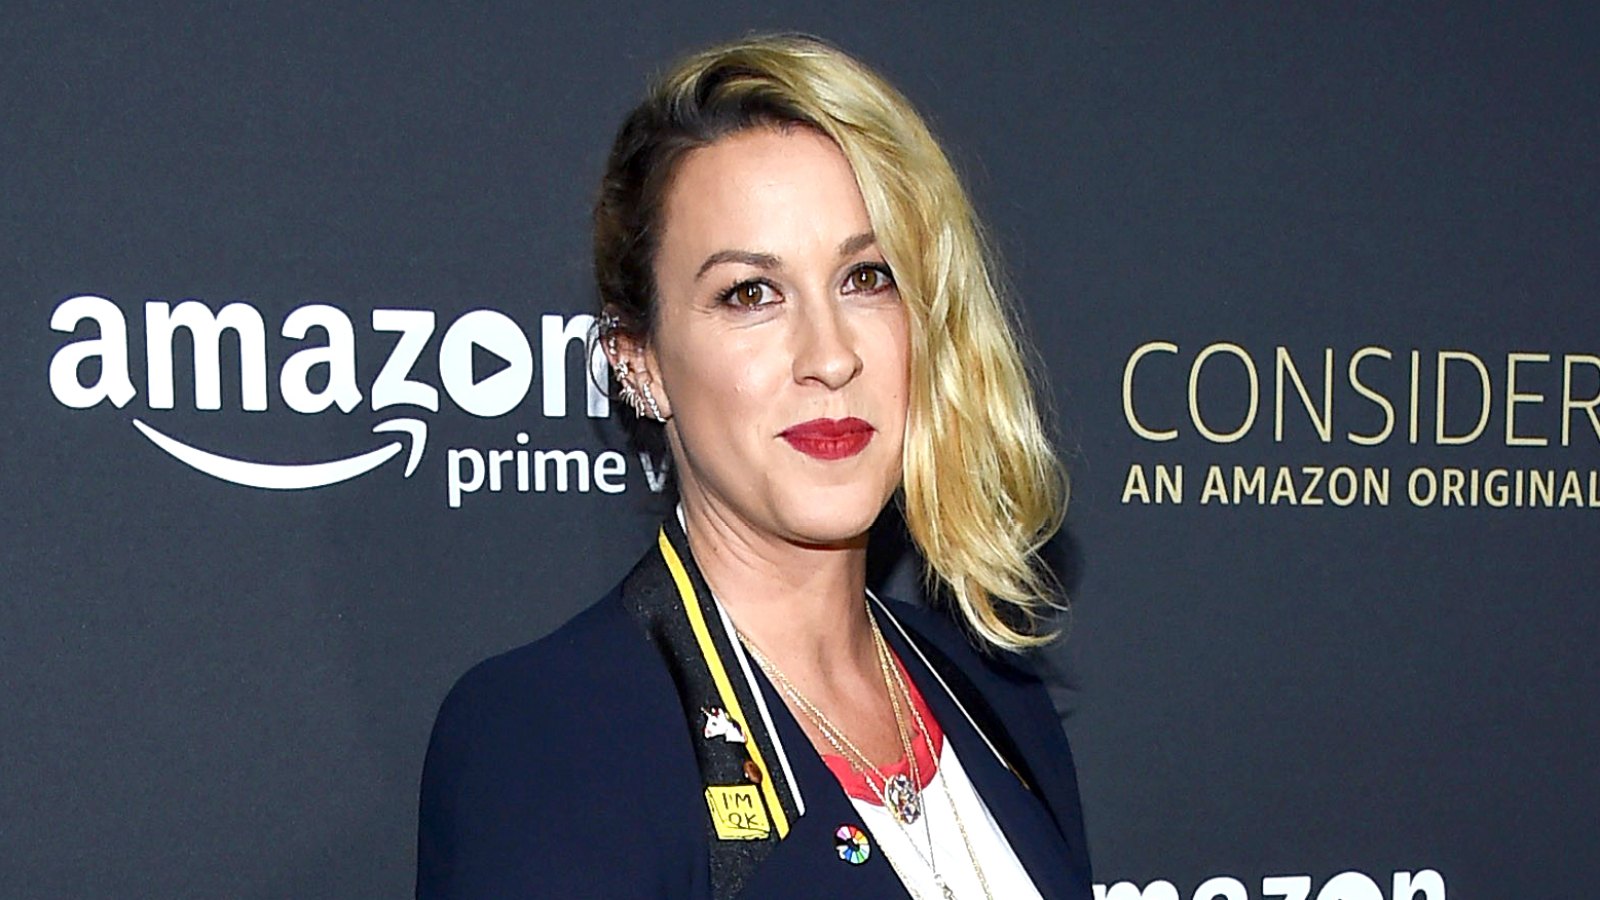 Alanis Morissette arrives at the FYC event for Amazon Video's 'Transparent' held at the Hollywood Athletic Club in Hollywood, California on April 22, 2017.